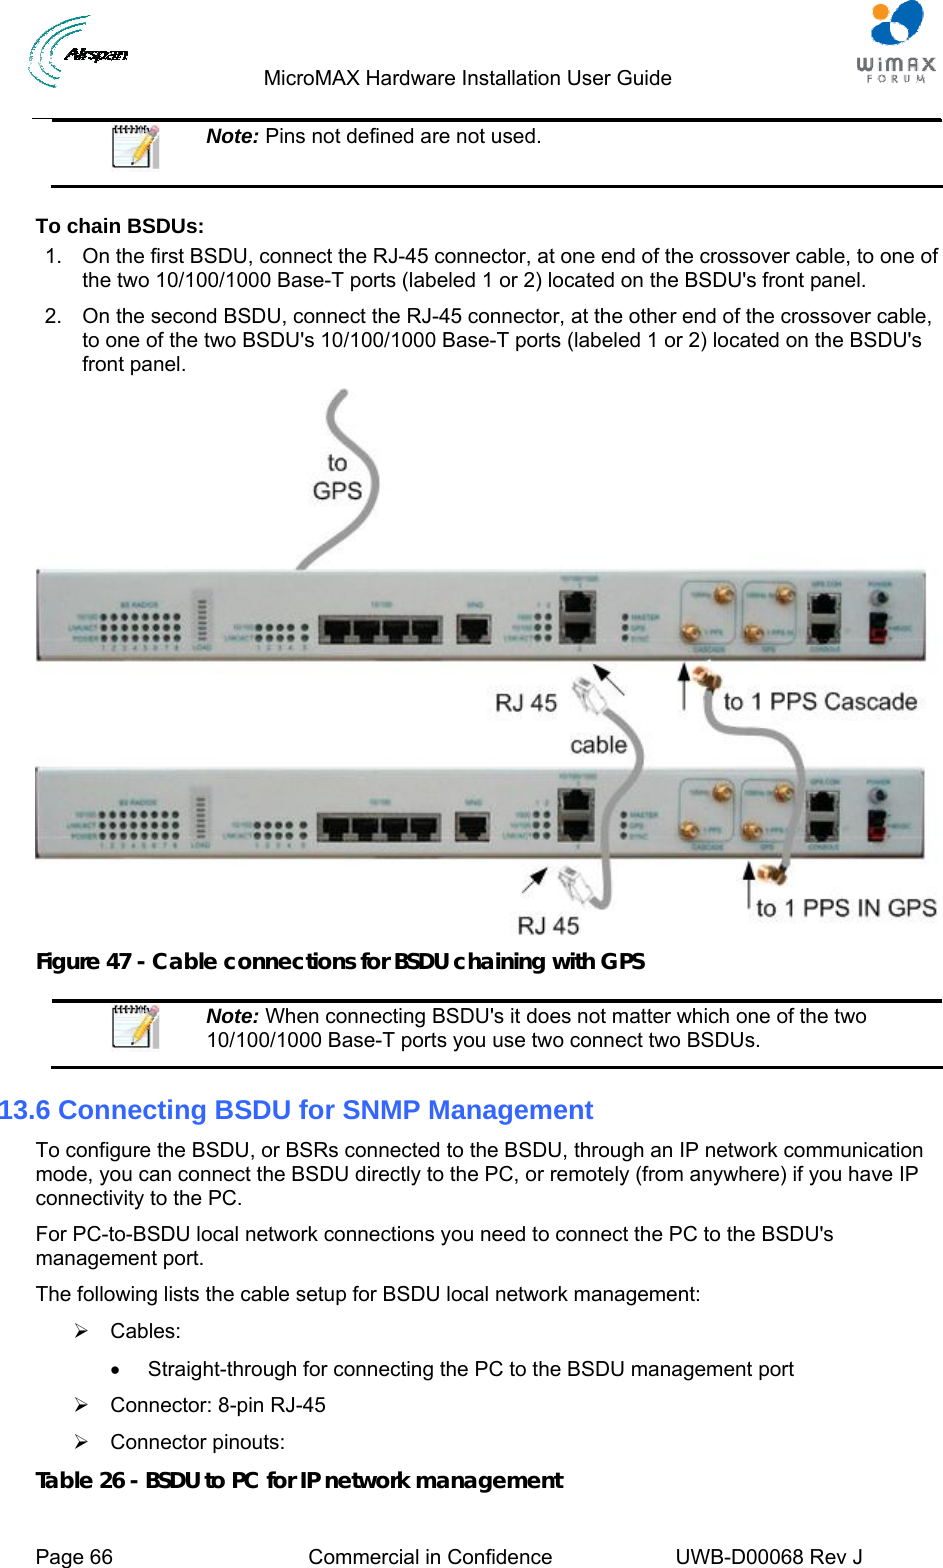                                  MicroMAX Hardware Installation User Guide     Page 66  Commercial in Confidence  UWB-D00068 Rev J    Note: Pins not defined are not used.  To chain BSDUs: 1.  On the first BSDU, connect the RJ-45 connector, at one end of the crossover cable, to one of the two 10/100/1000 Base-T ports (labeled 1 or 2) located on the BSDU&apos;s front panel. 2.  On the second BSDU, connect the RJ-45 connector, at the other end of the crossover cable, to one of the two BSDU&apos;s 10/100/1000 Base-T ports (labeled 1 or 2) located on the BSDU&apos;s front panel.  Figure 47 - Cable connections for BSDU chaining with GPS   Note: When connecting BSDU&apos;s it does not matter which one of the two 10/100/1000 Base-T ports you use two connect two BSDUs. 13.6 Connecting BSDU for SNMP Management To configure the BSDU, or BSRs connected to the BSDU, through an IP network communication mode, you can connect the BSDU directly to the PC, or remotely (from anywhere) if you have IP connectivity to the PC. For PC-to-BSDU local network connections you need to connect the PC to the BSDU&apos;s management port. The following lists the cable setup for BSDU local network management: ¾ Cables:   •  Straight-through for connecting the PC to the BSDU management port ¾  Connector: 8-pin RJ-45  ¾ Connector pinouts: Table 26 - BSDU to PC for IP network management 